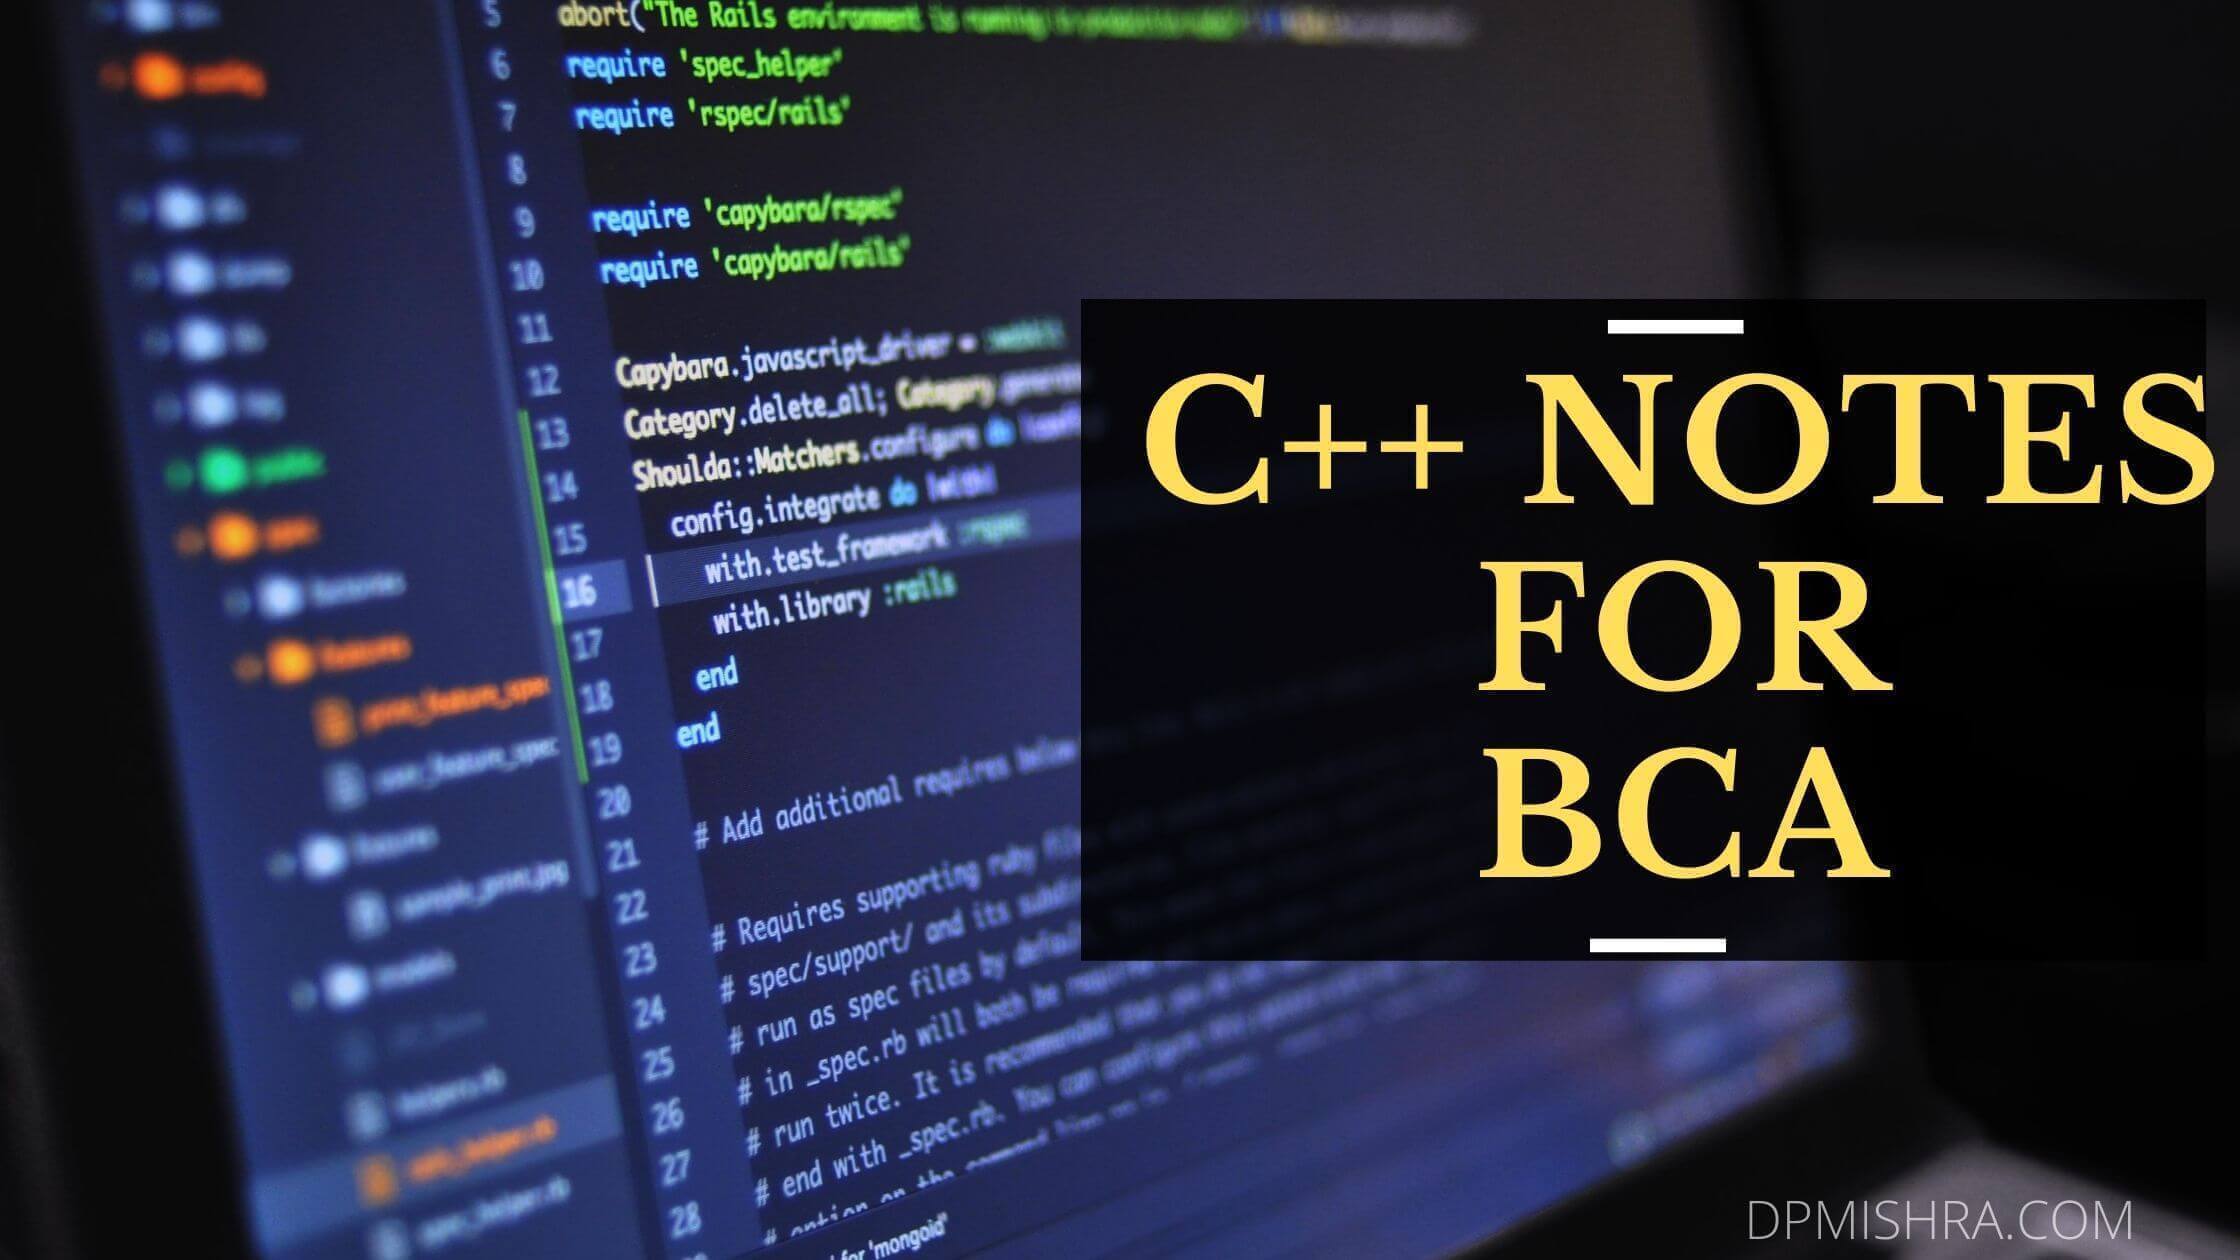 C++ Notes for BCA VBSPU